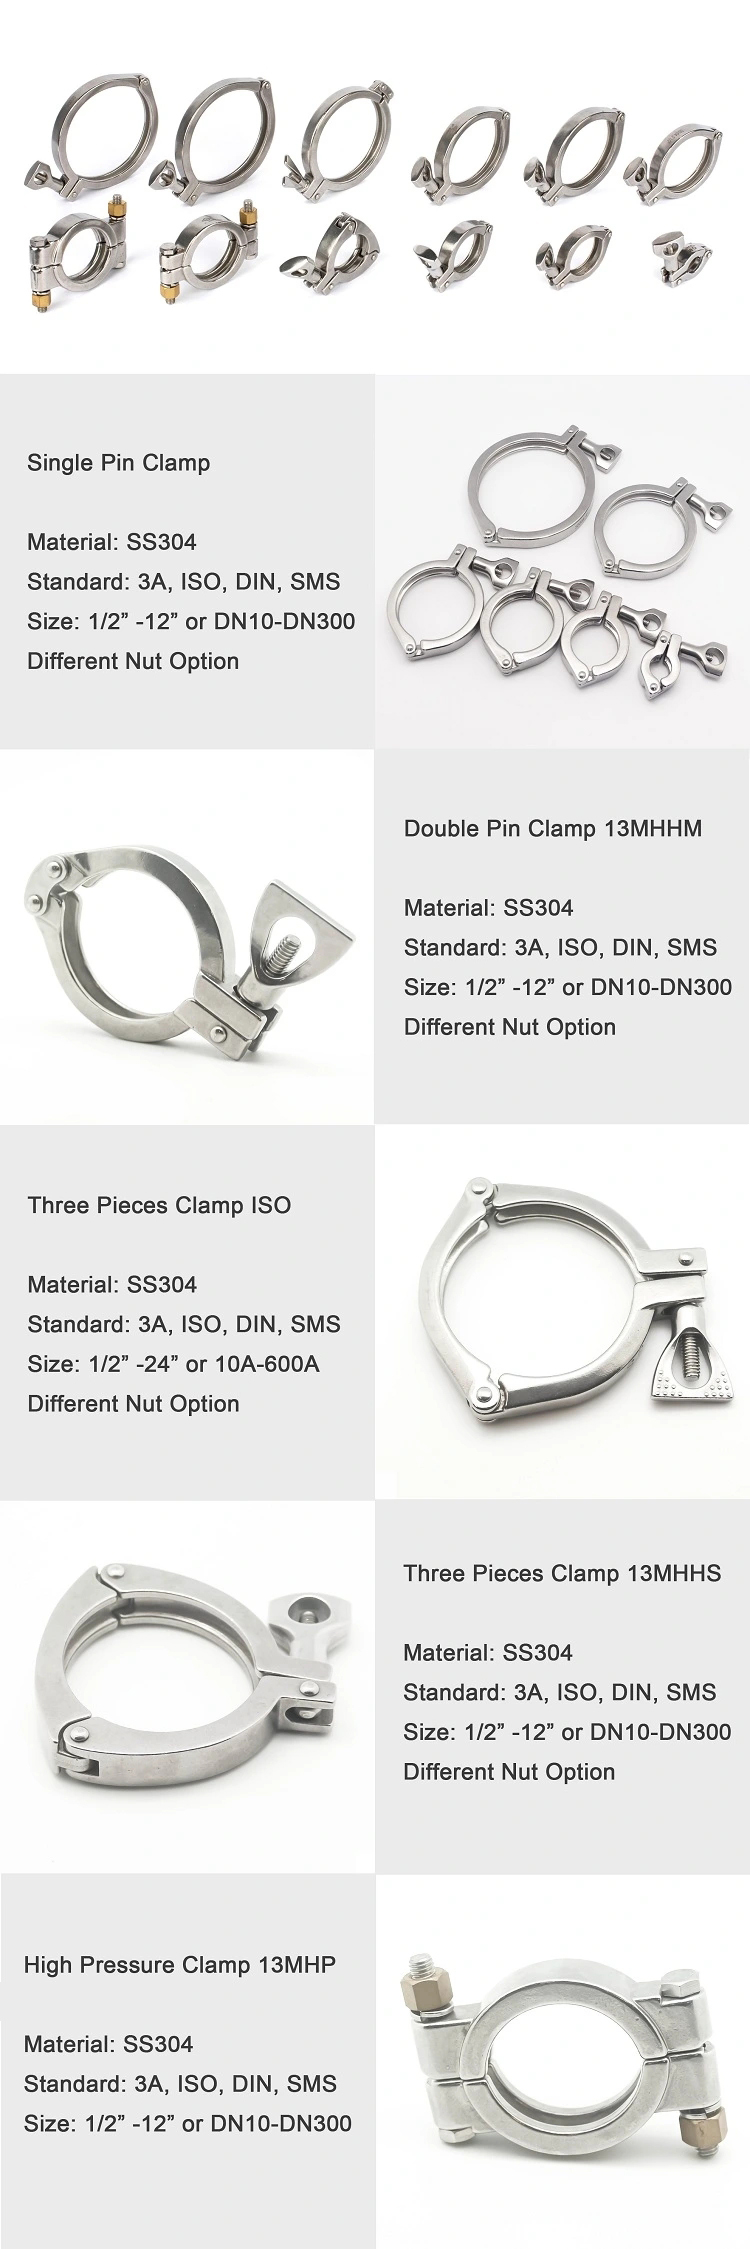 13mhhm Sanitary Stainless Steel Heavy Duty Clamp Pipe Fitting Clamp